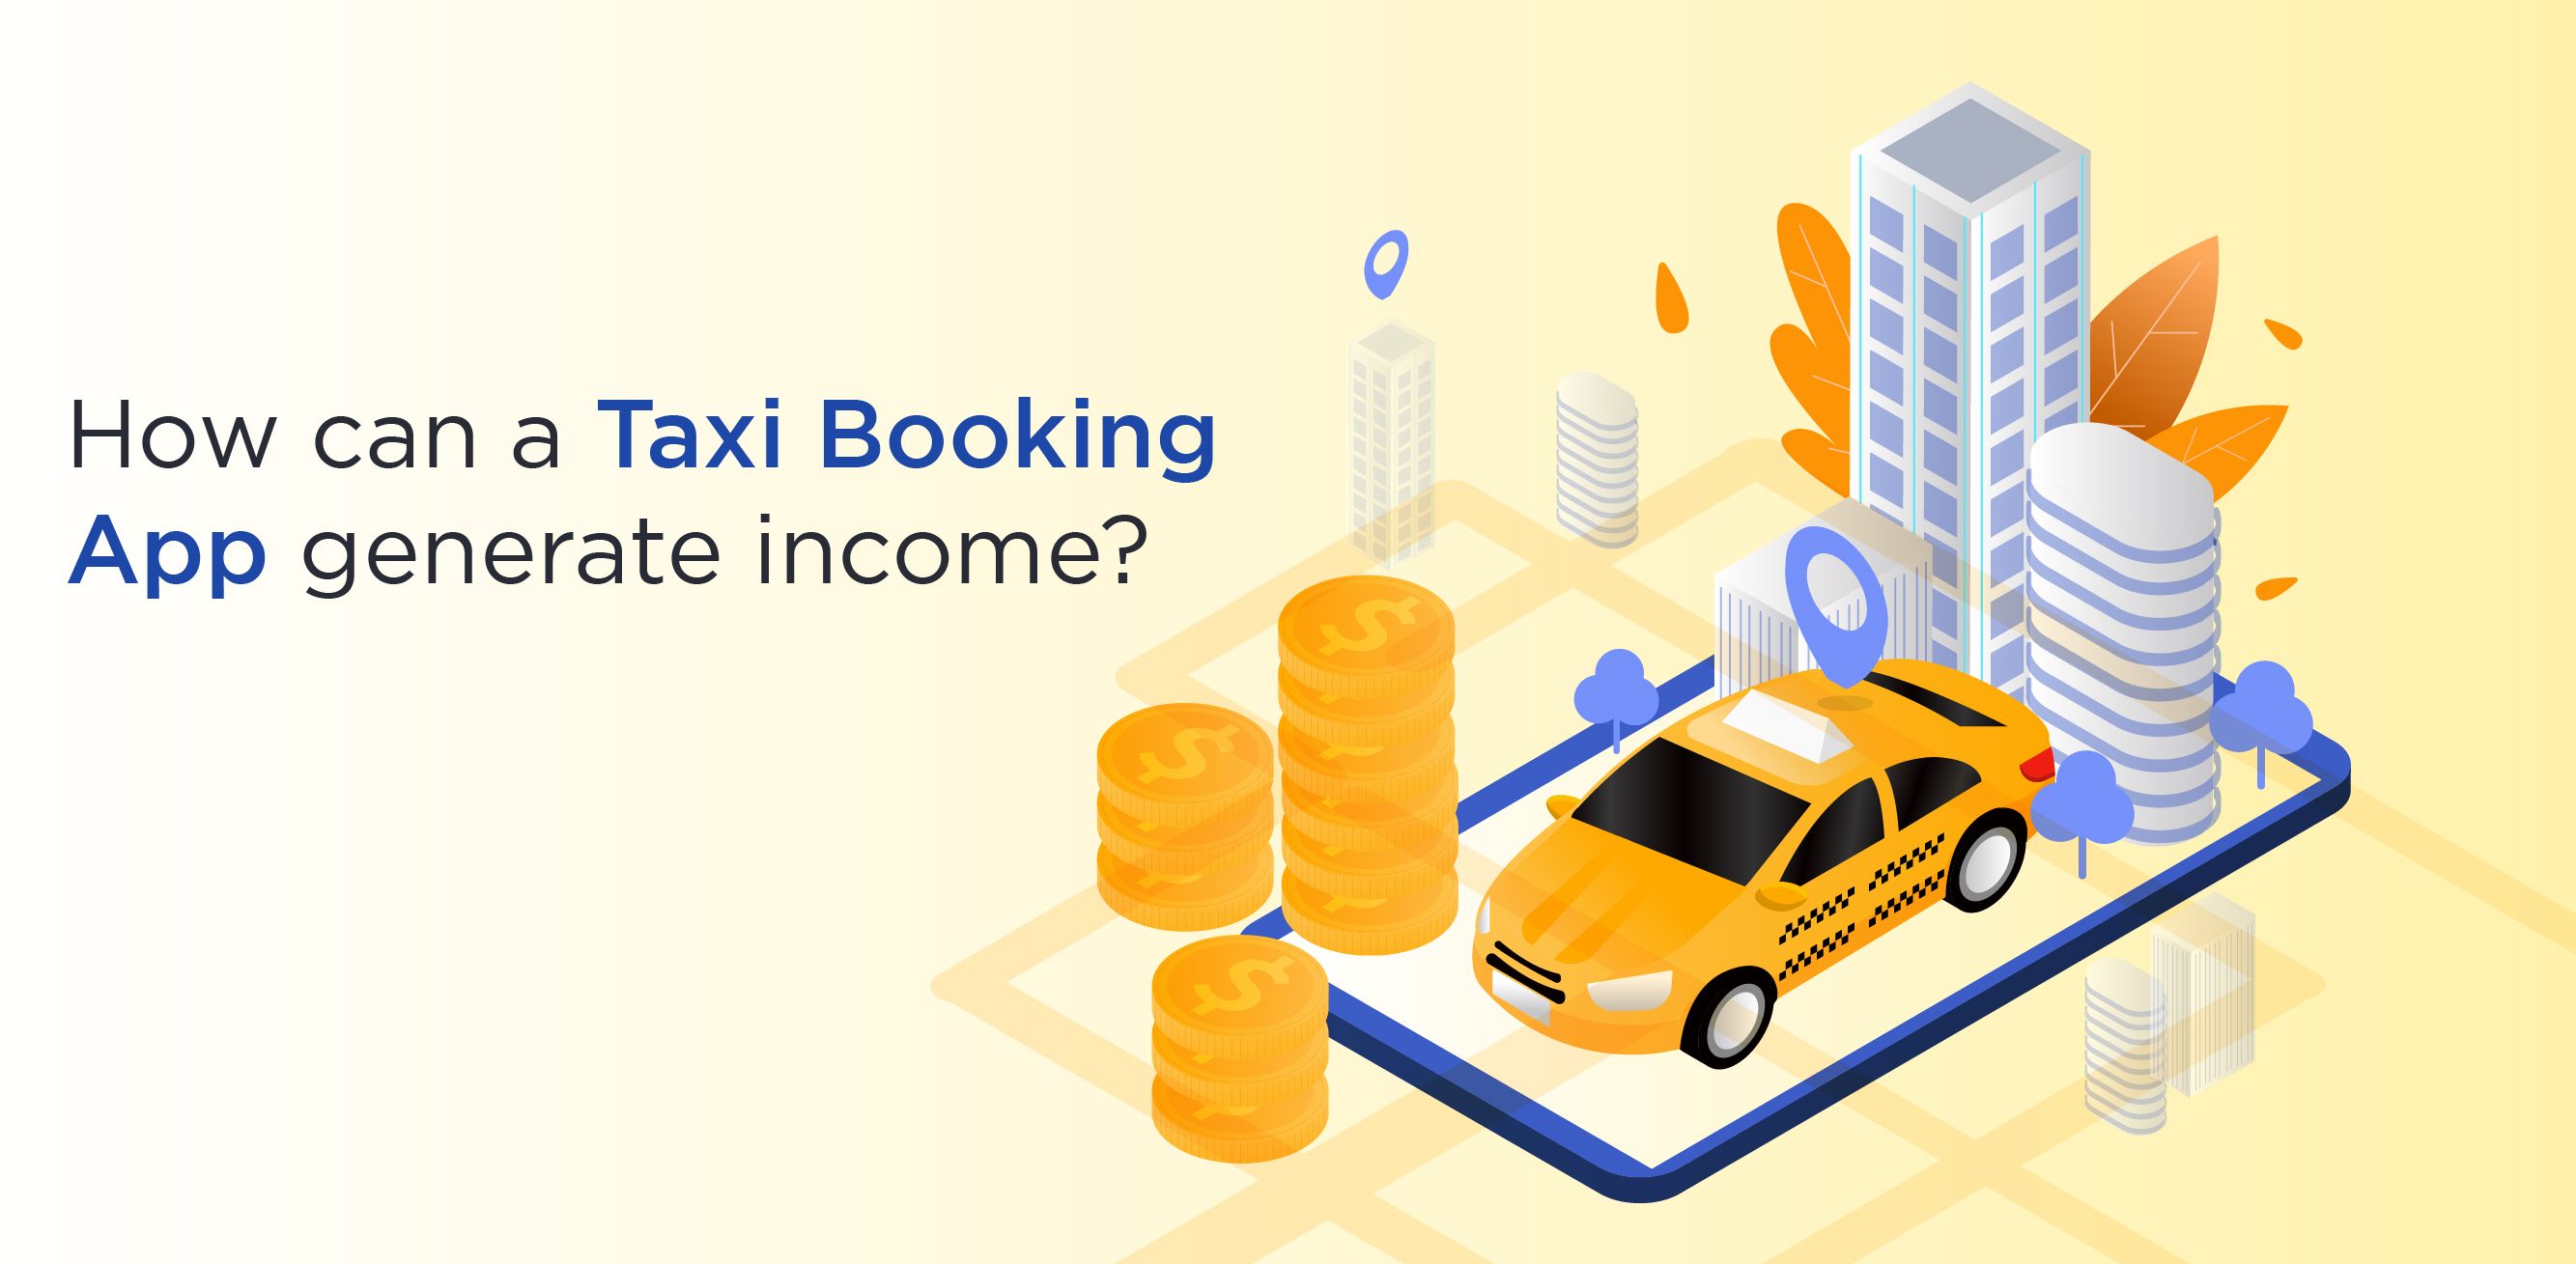 How can a taxi booking app generate income?